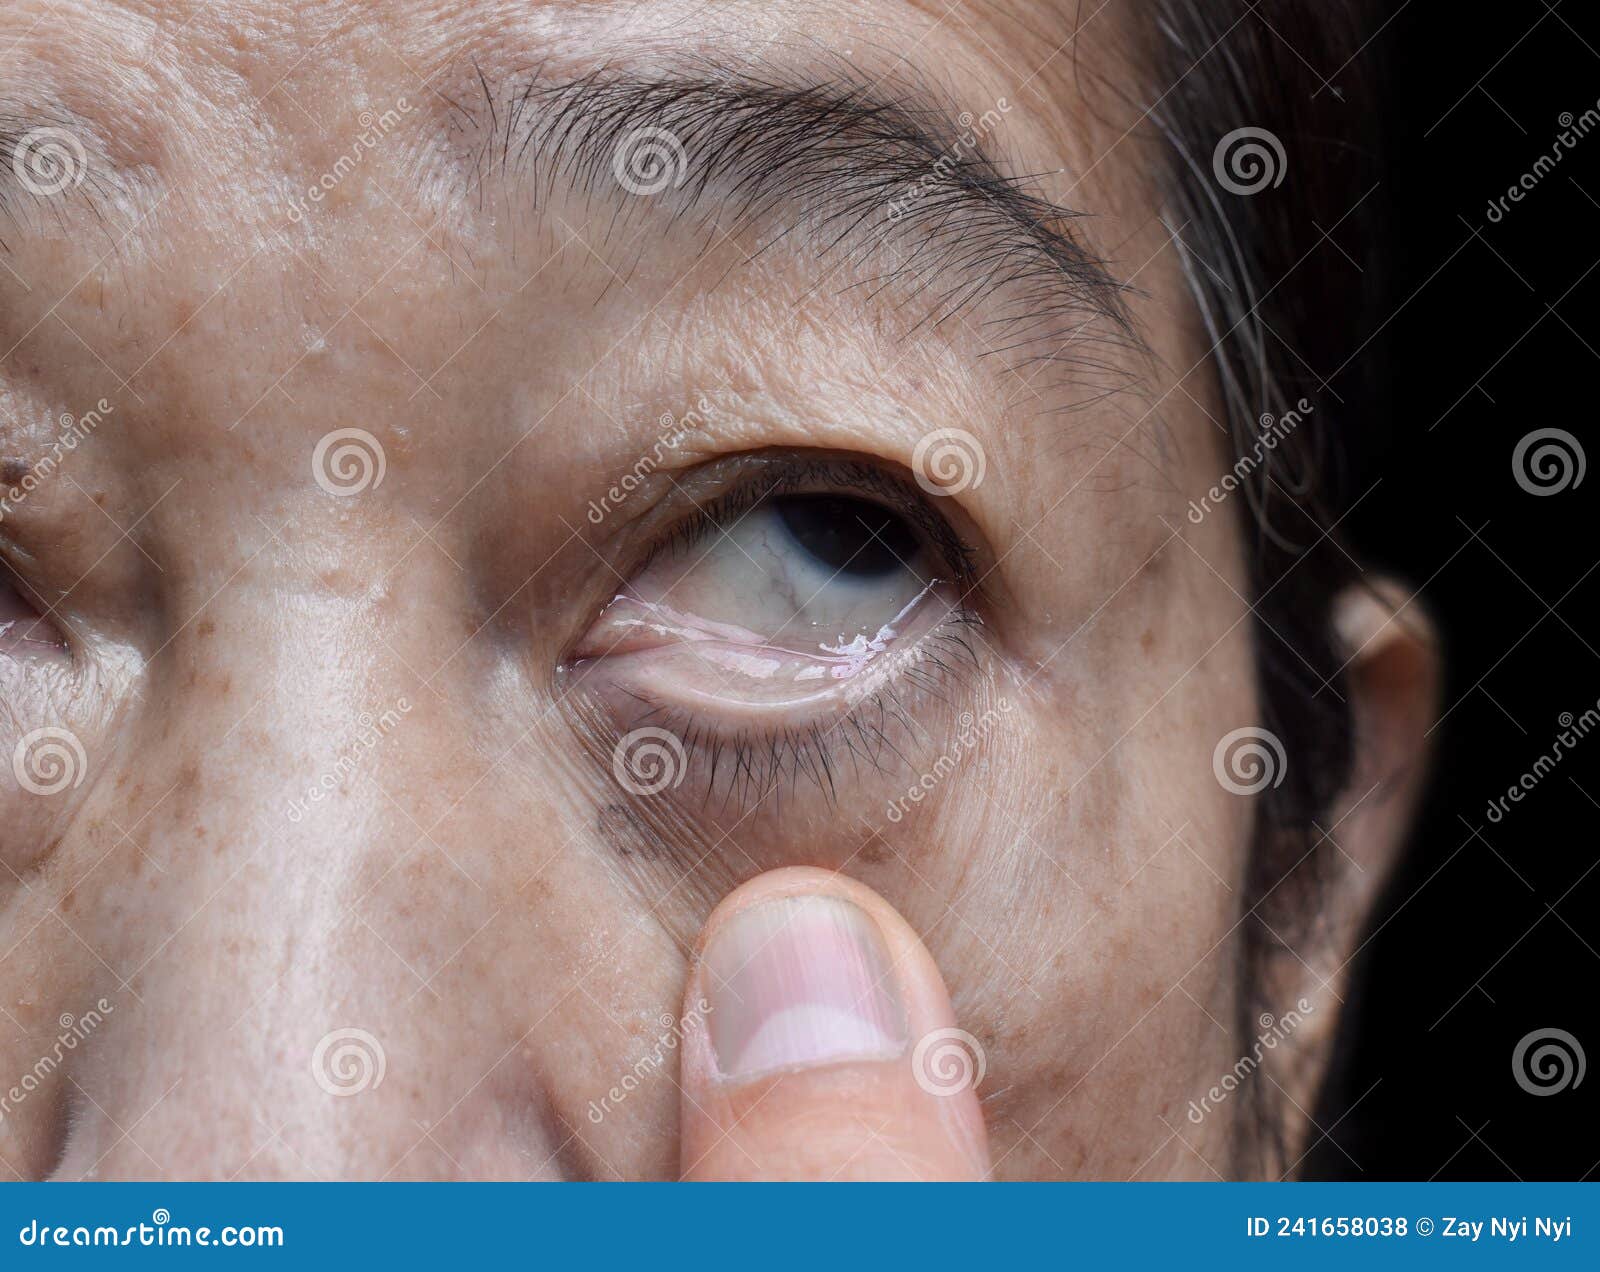 pale skin of asian woman. sign of anemia. pallor at eyelid